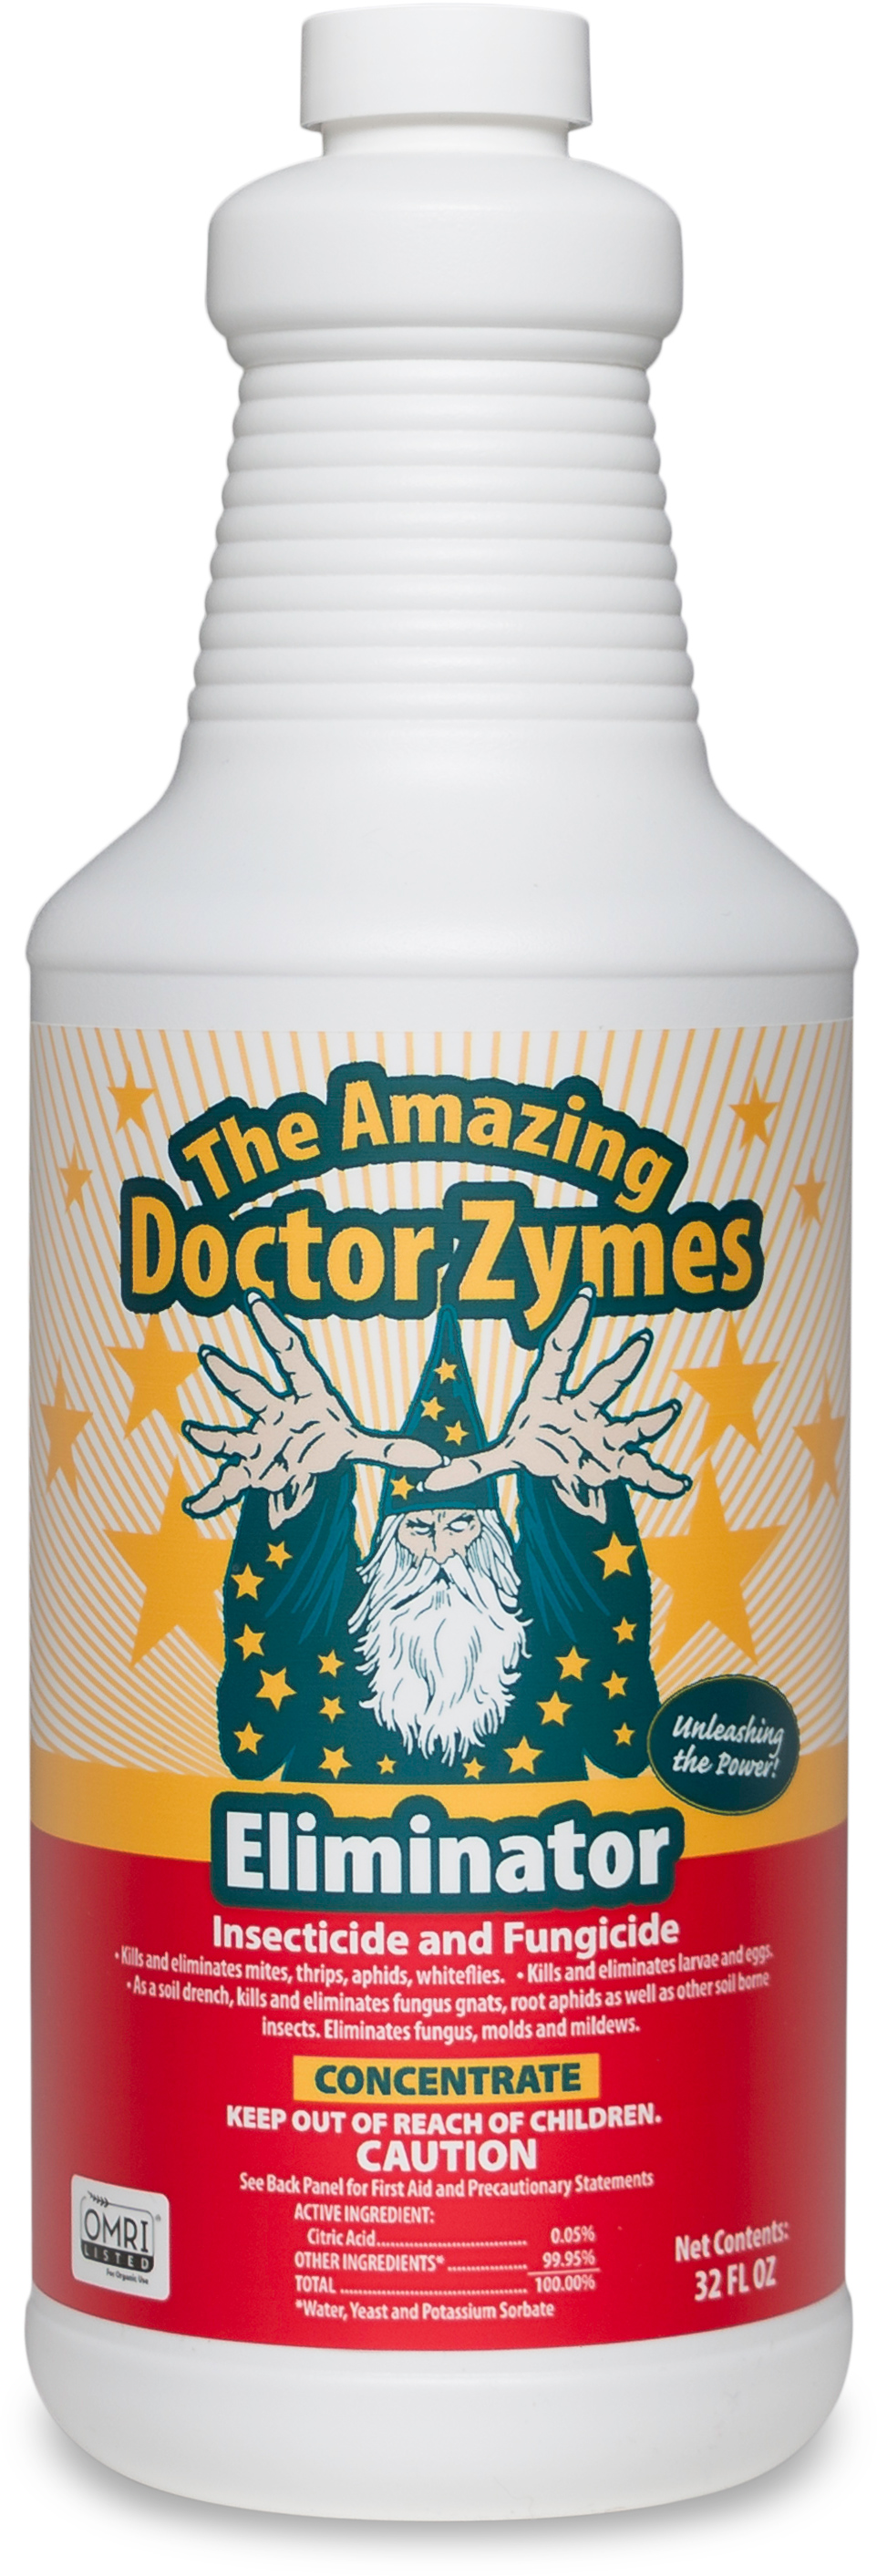 Picture for The Amazing Doctor Zymes Eliminator Concentrate, 32 oz